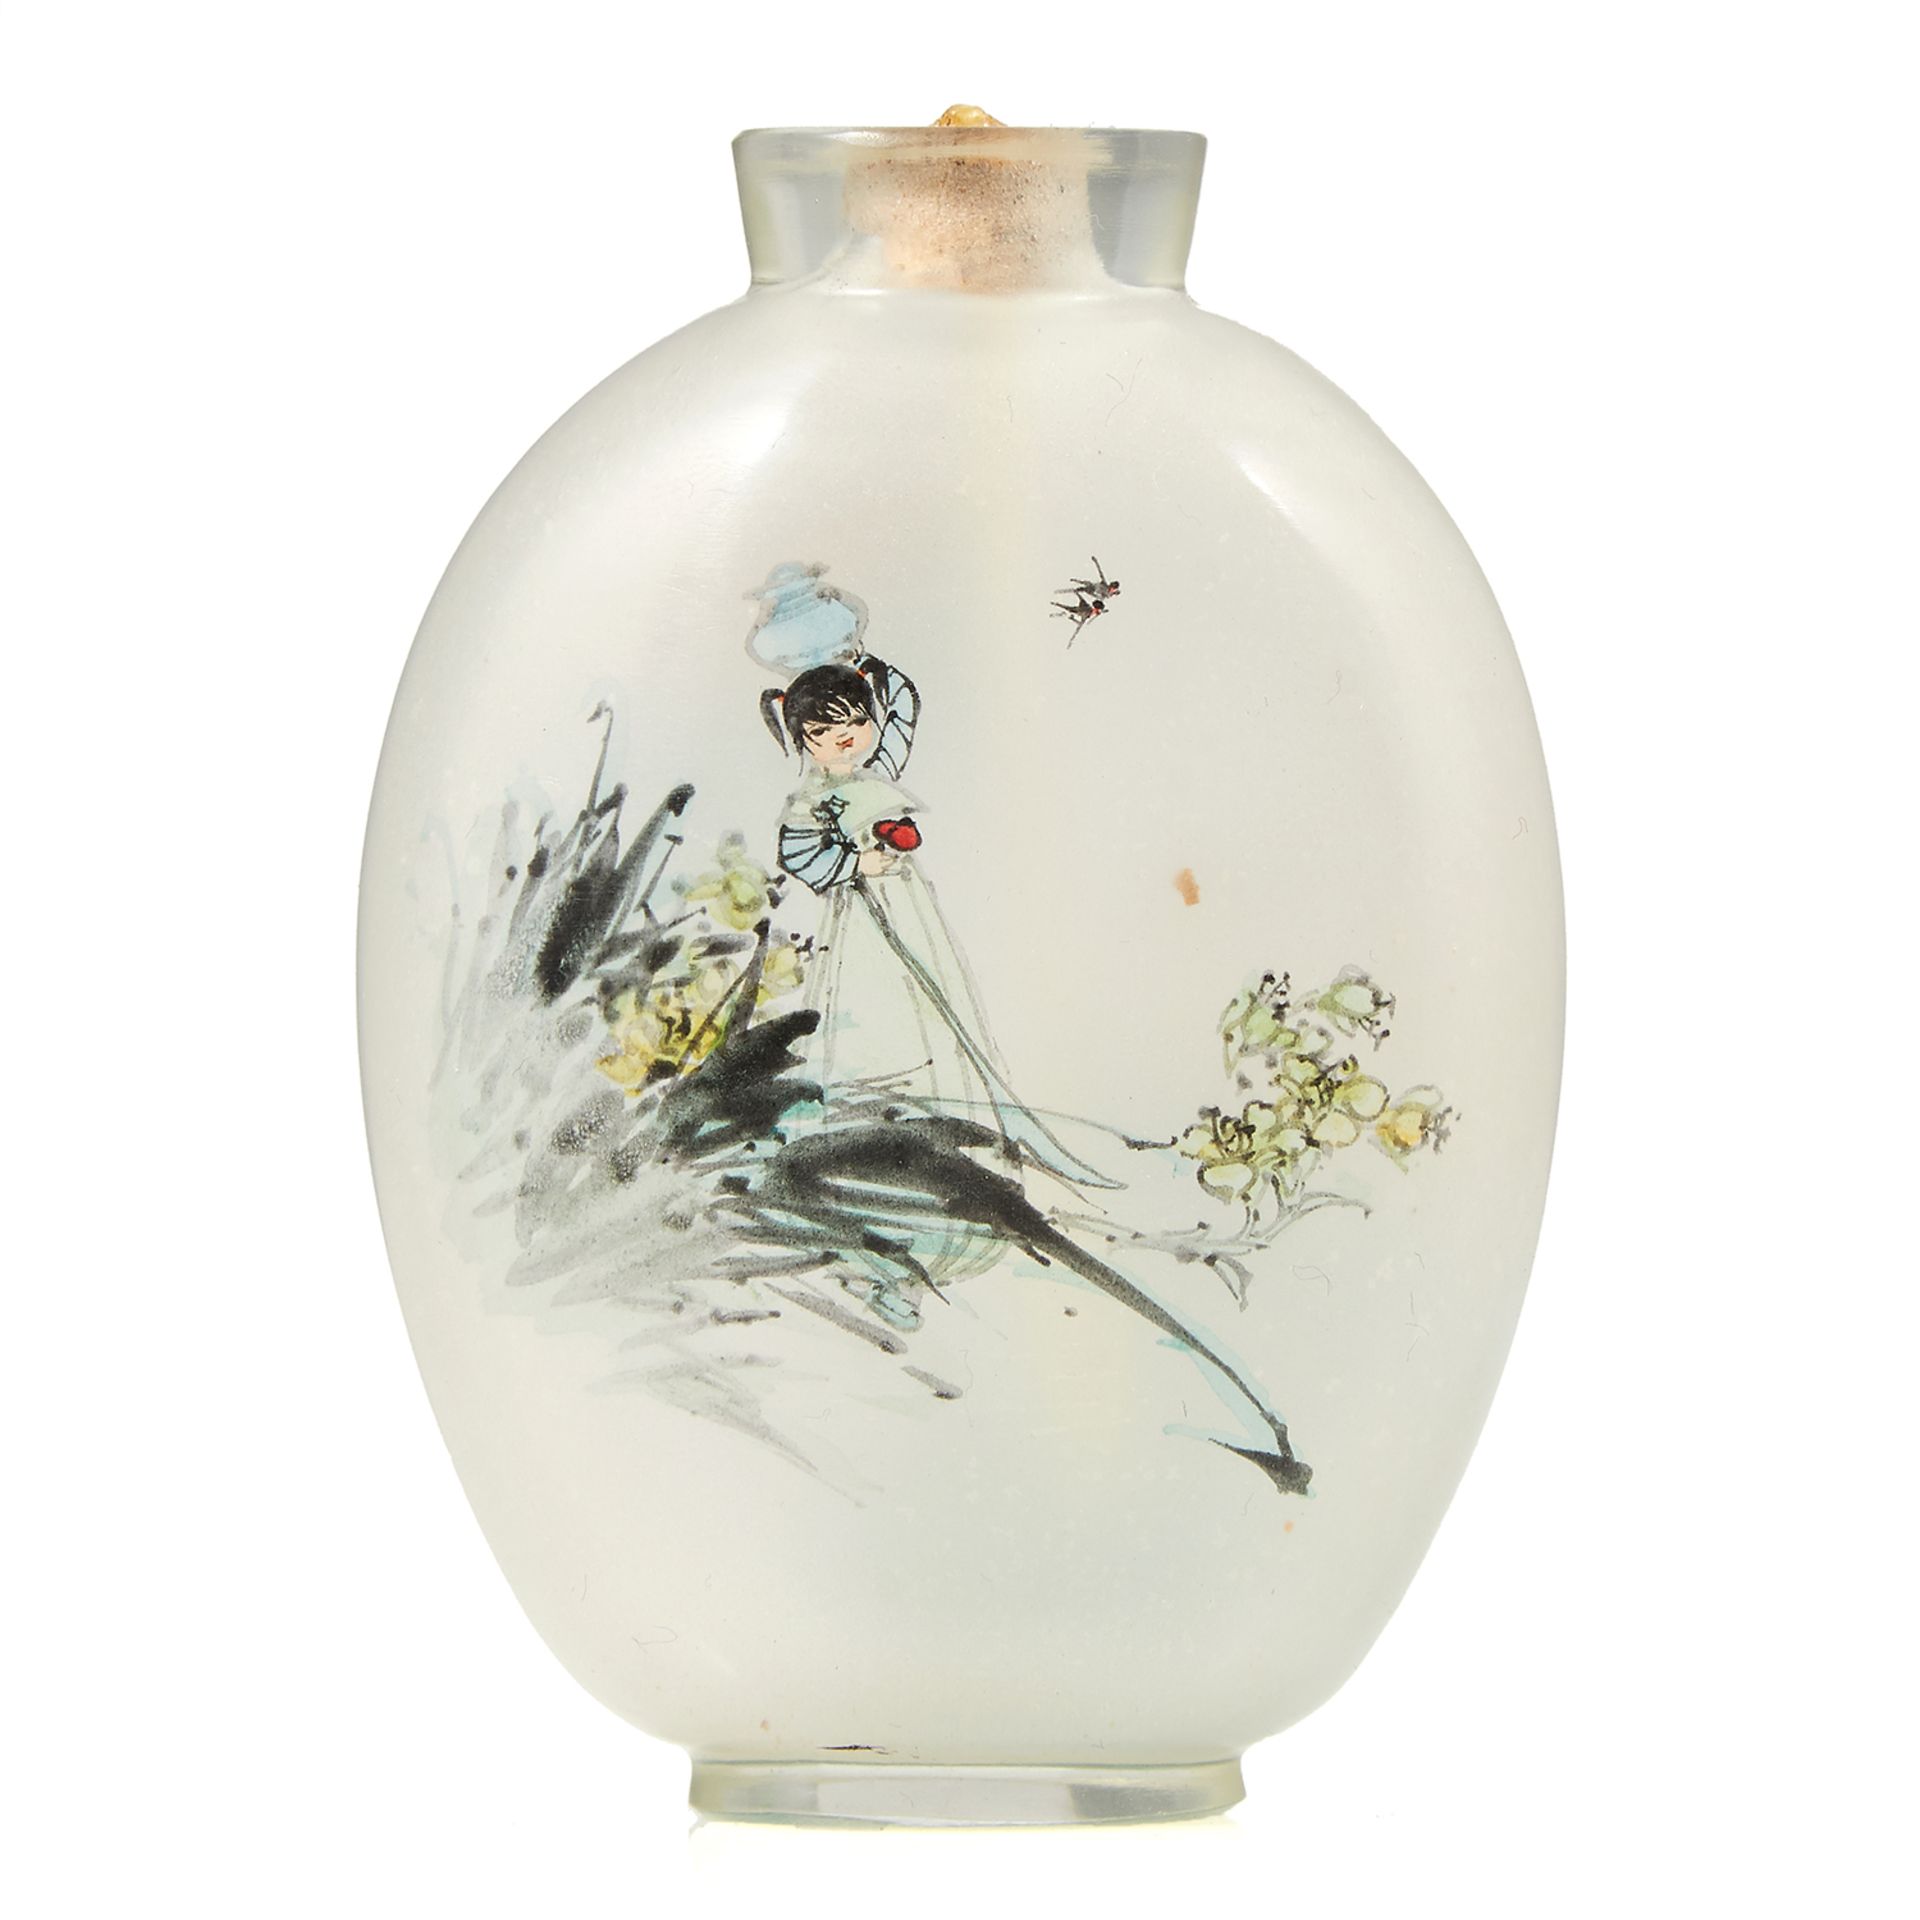 AN ANTIQUE CHINESE PAINTED GLASS SNUFF BOTTLE, CIRCA 1920 with painted scenes of a lady, and birds